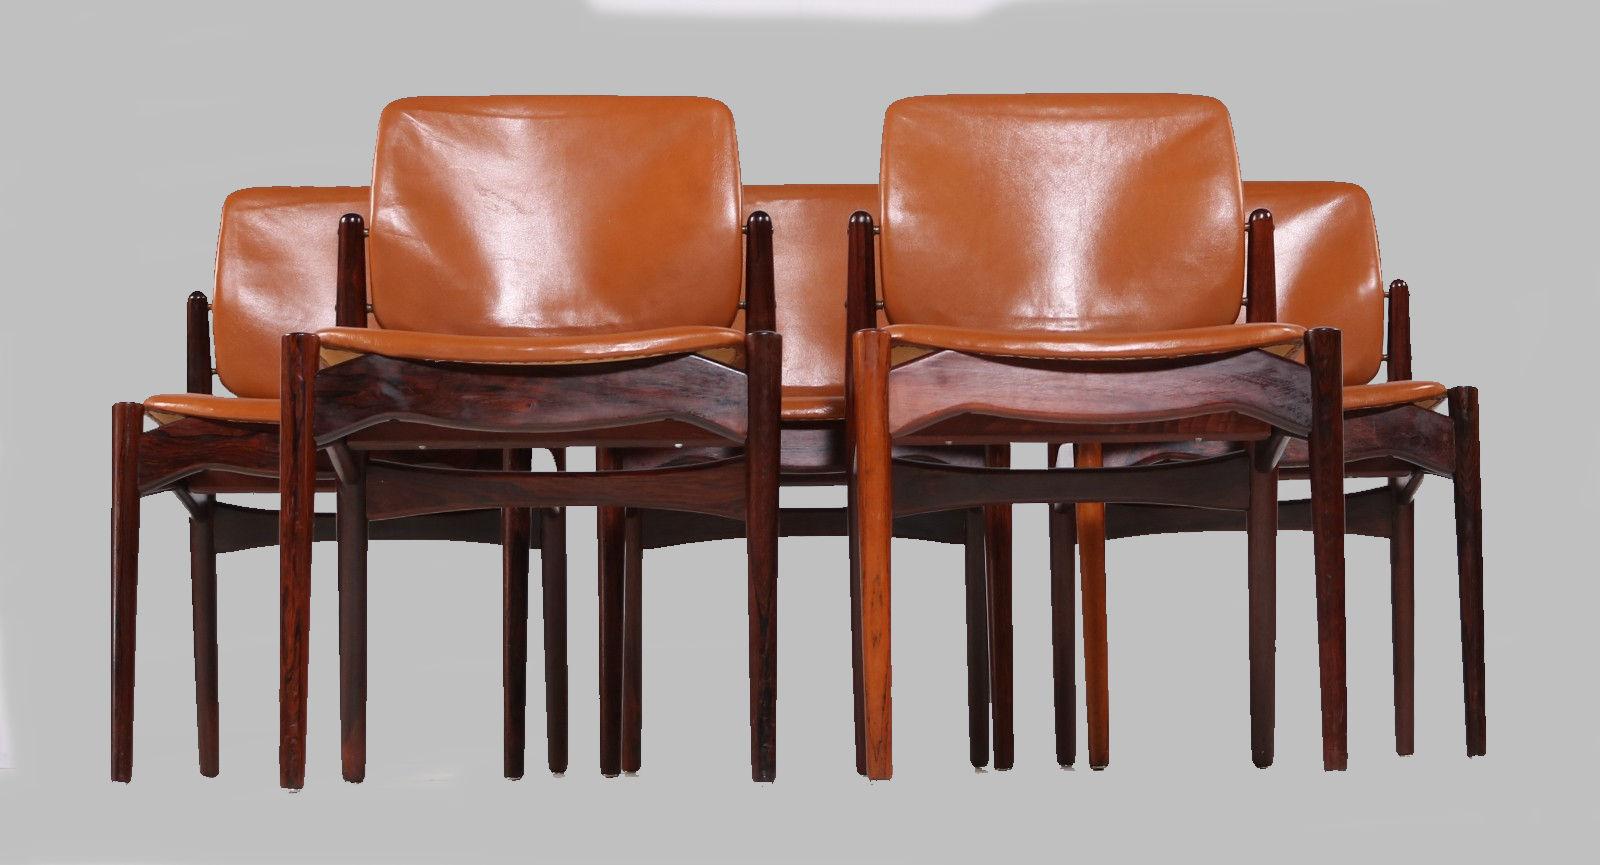 Set of 5 Danish rosewood dining chairs designed by Erik Buch and produced by Ørun Møbler in the 1960s

The model is often reffered to as the 